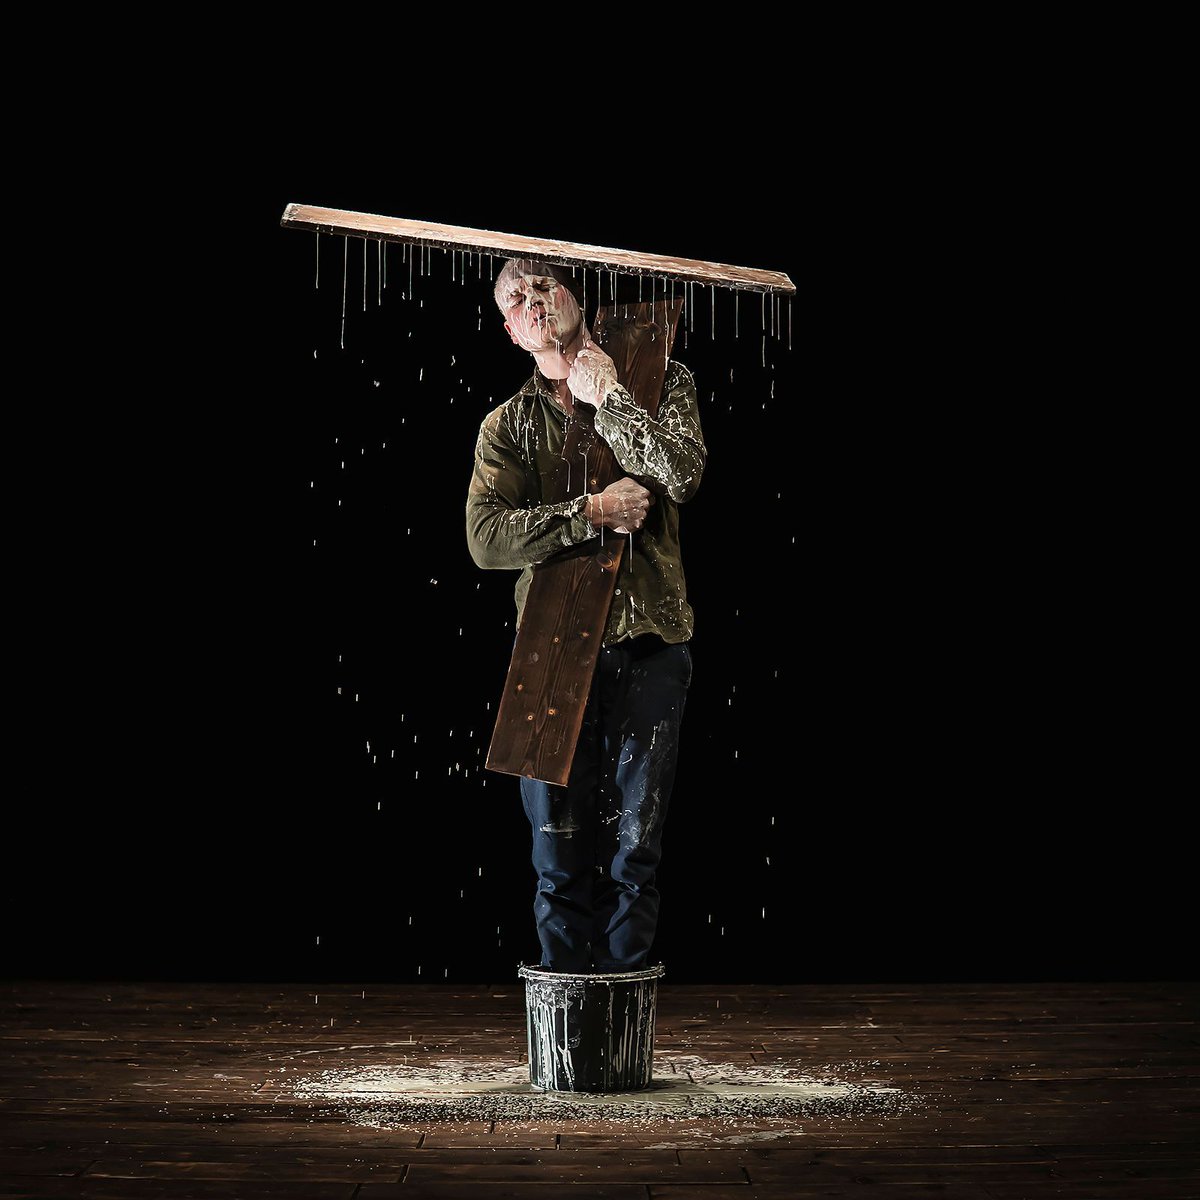 Sawdust Symphony explores the human desire to create and the tragedy of work. The artists' passion for crafting, juggling and fresh wood transport you into a unique DIY experience where carpentry and circus collide at #ZOO24 #edfringe. Tickets via buff.ly/3y7UMfz